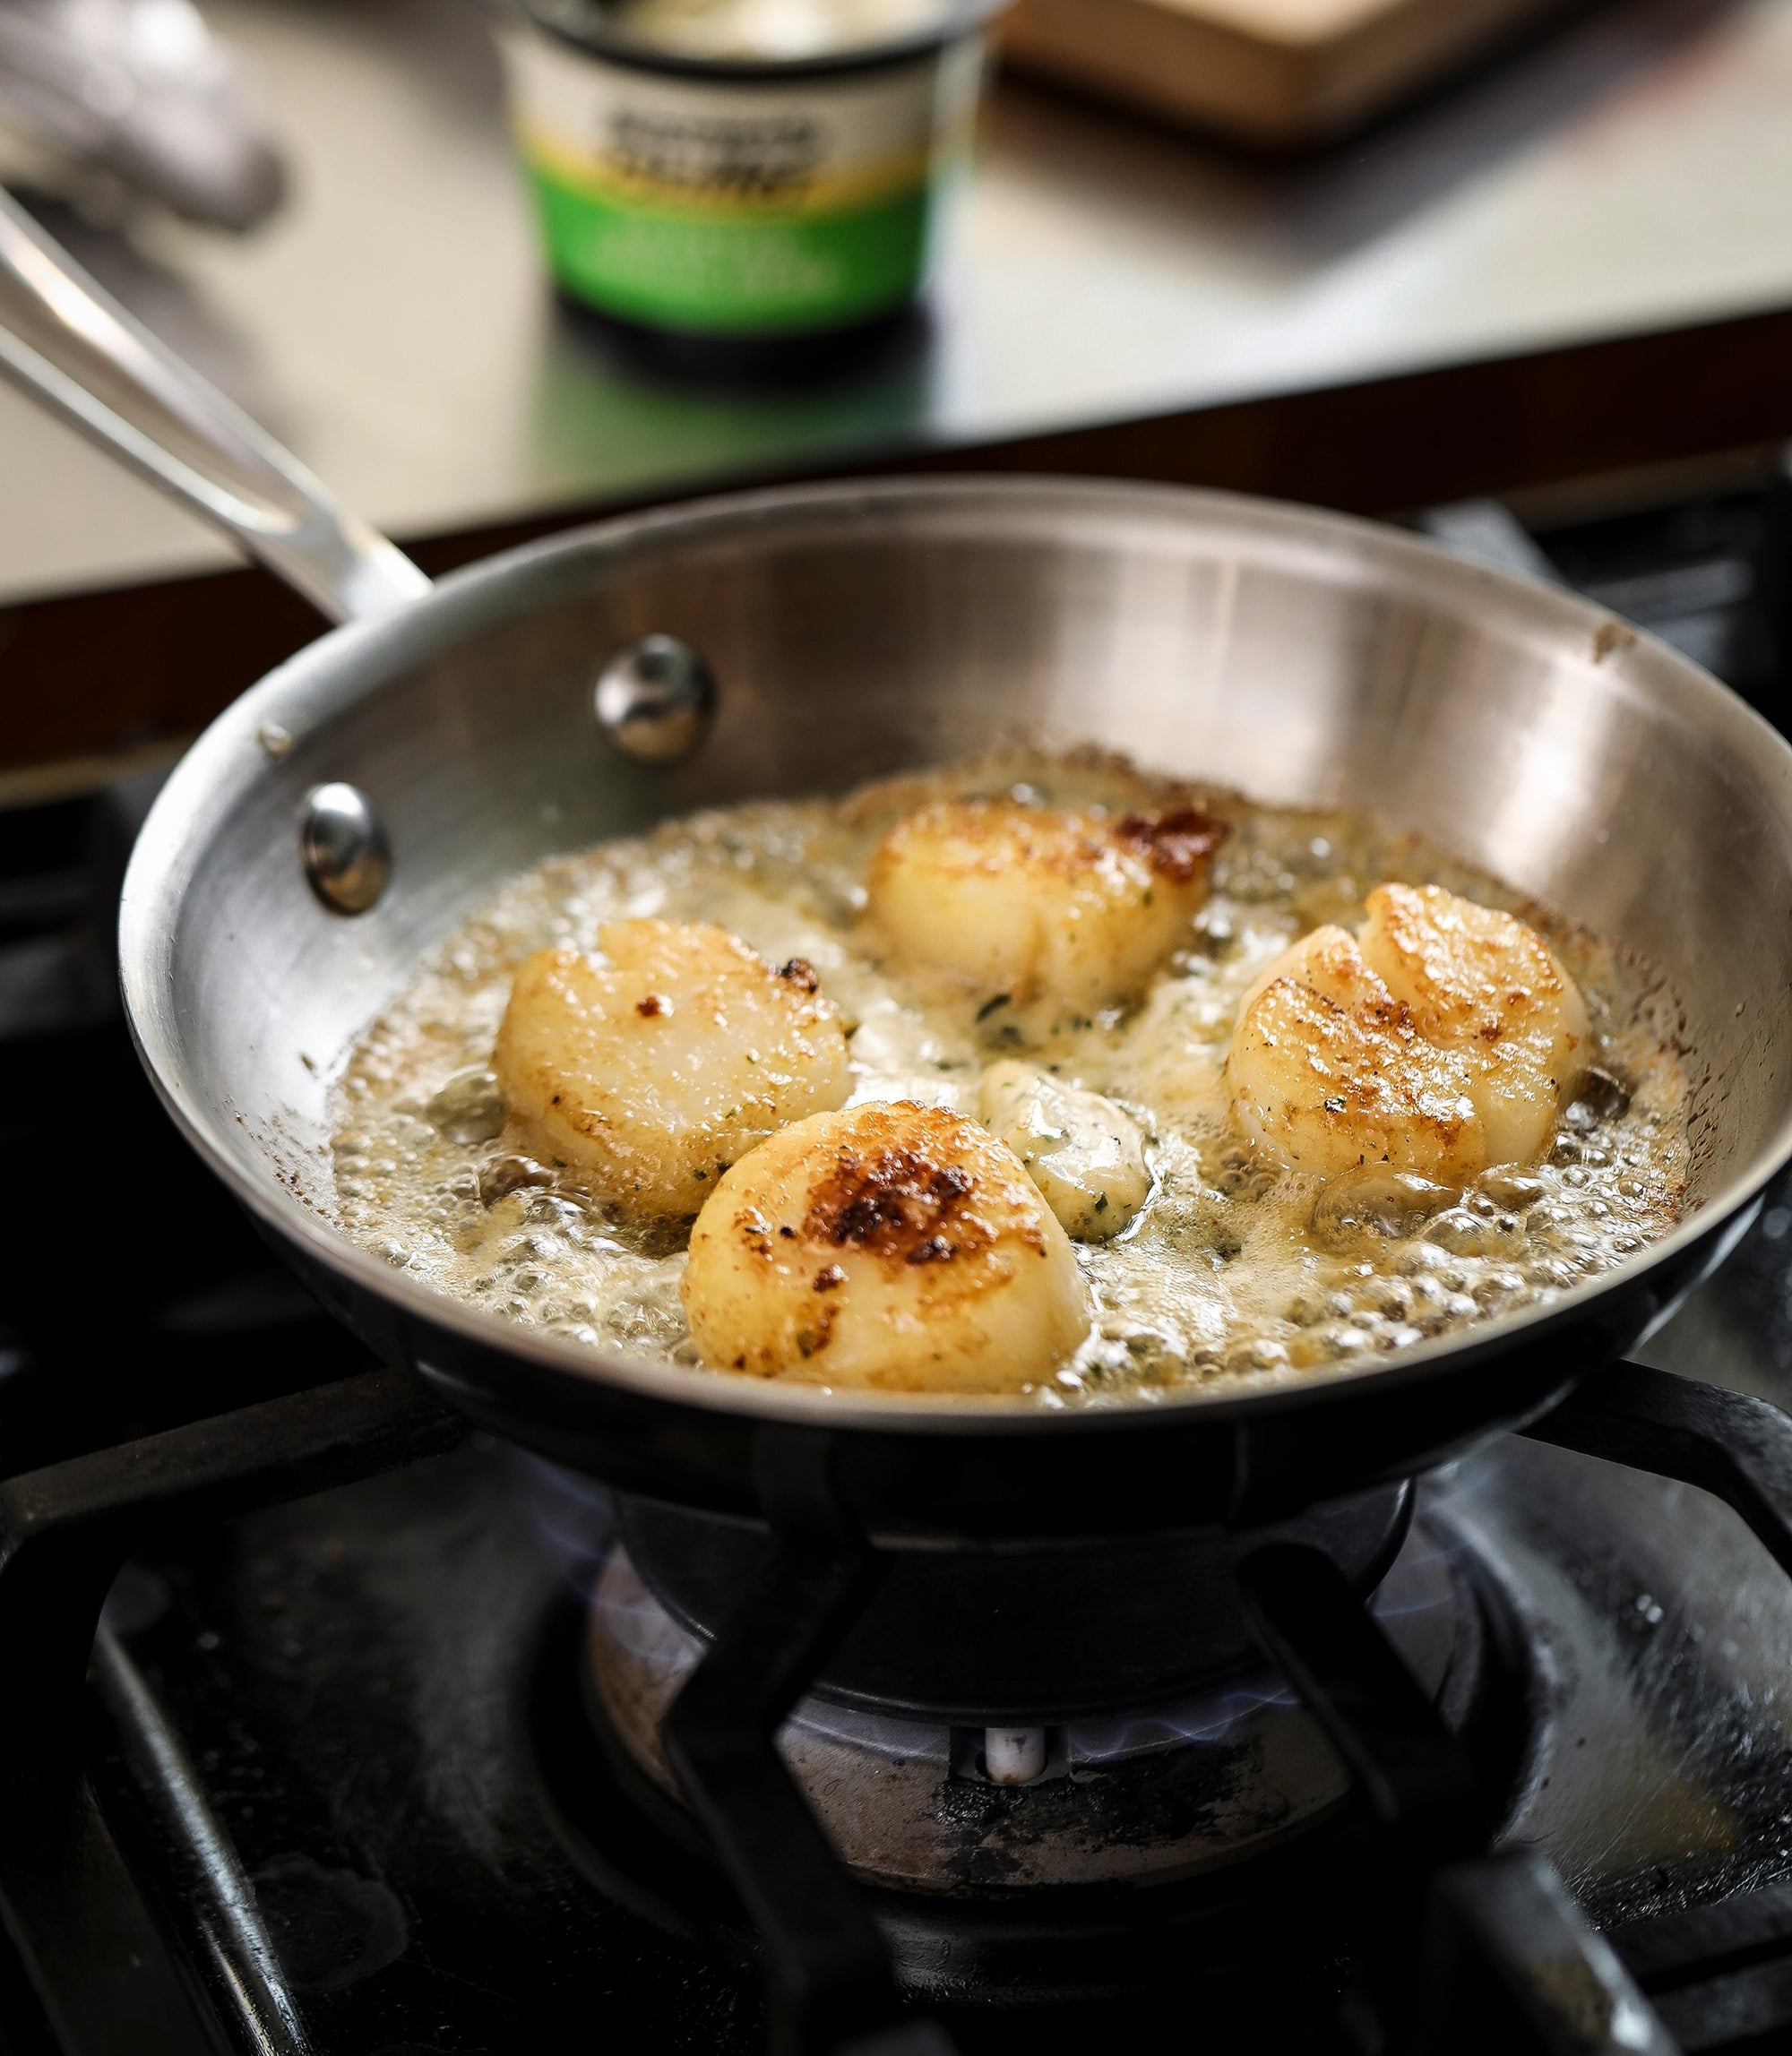 Scallops cooking in Epicurean Butter Roasted Garlic Herb Flavored Butter